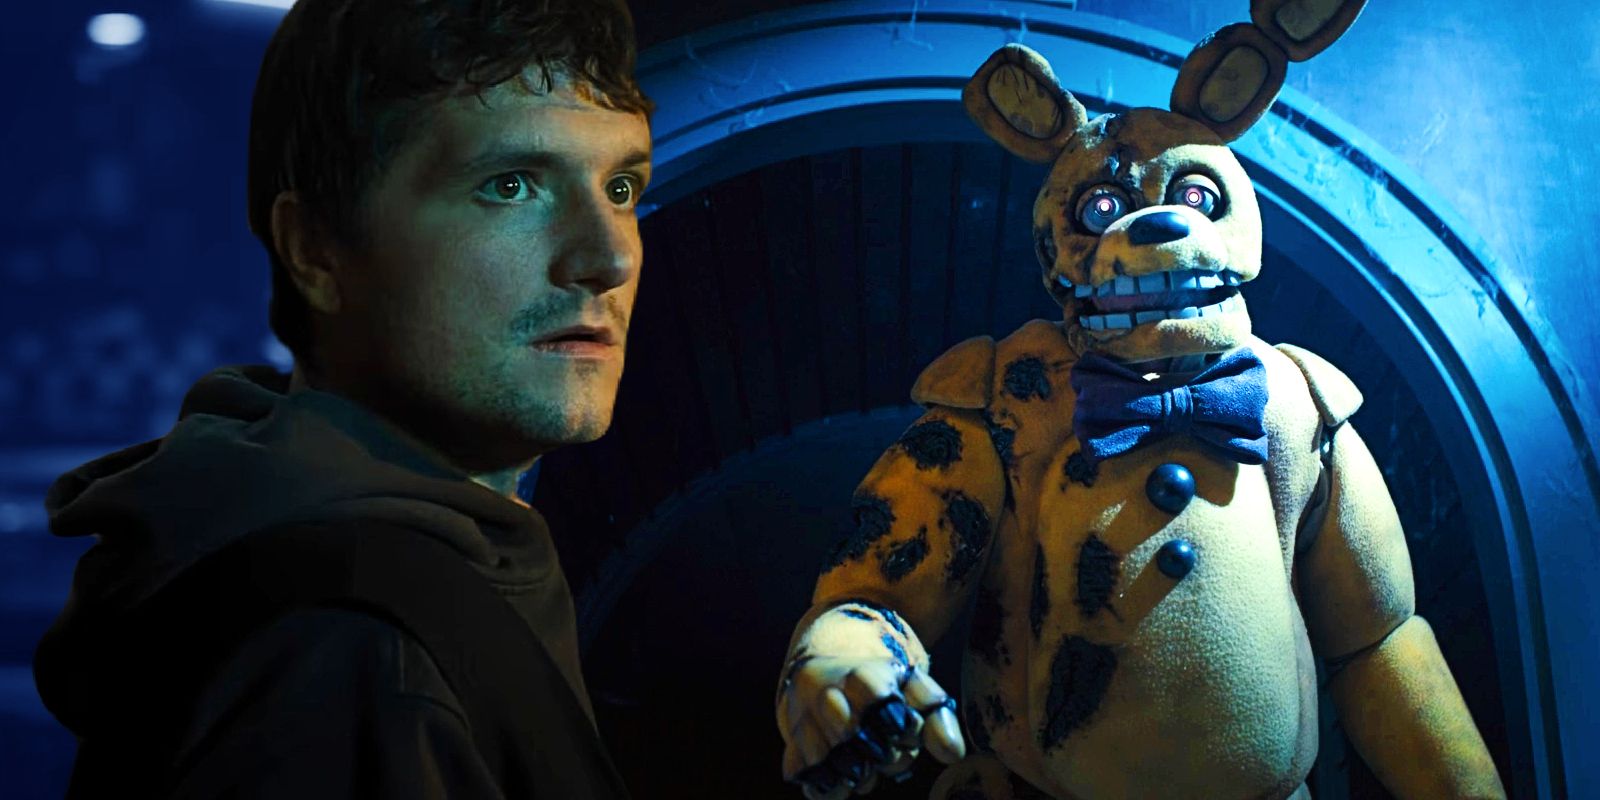 Five Nights at Freddy's” movie: what should we expect? – Bulldog Times